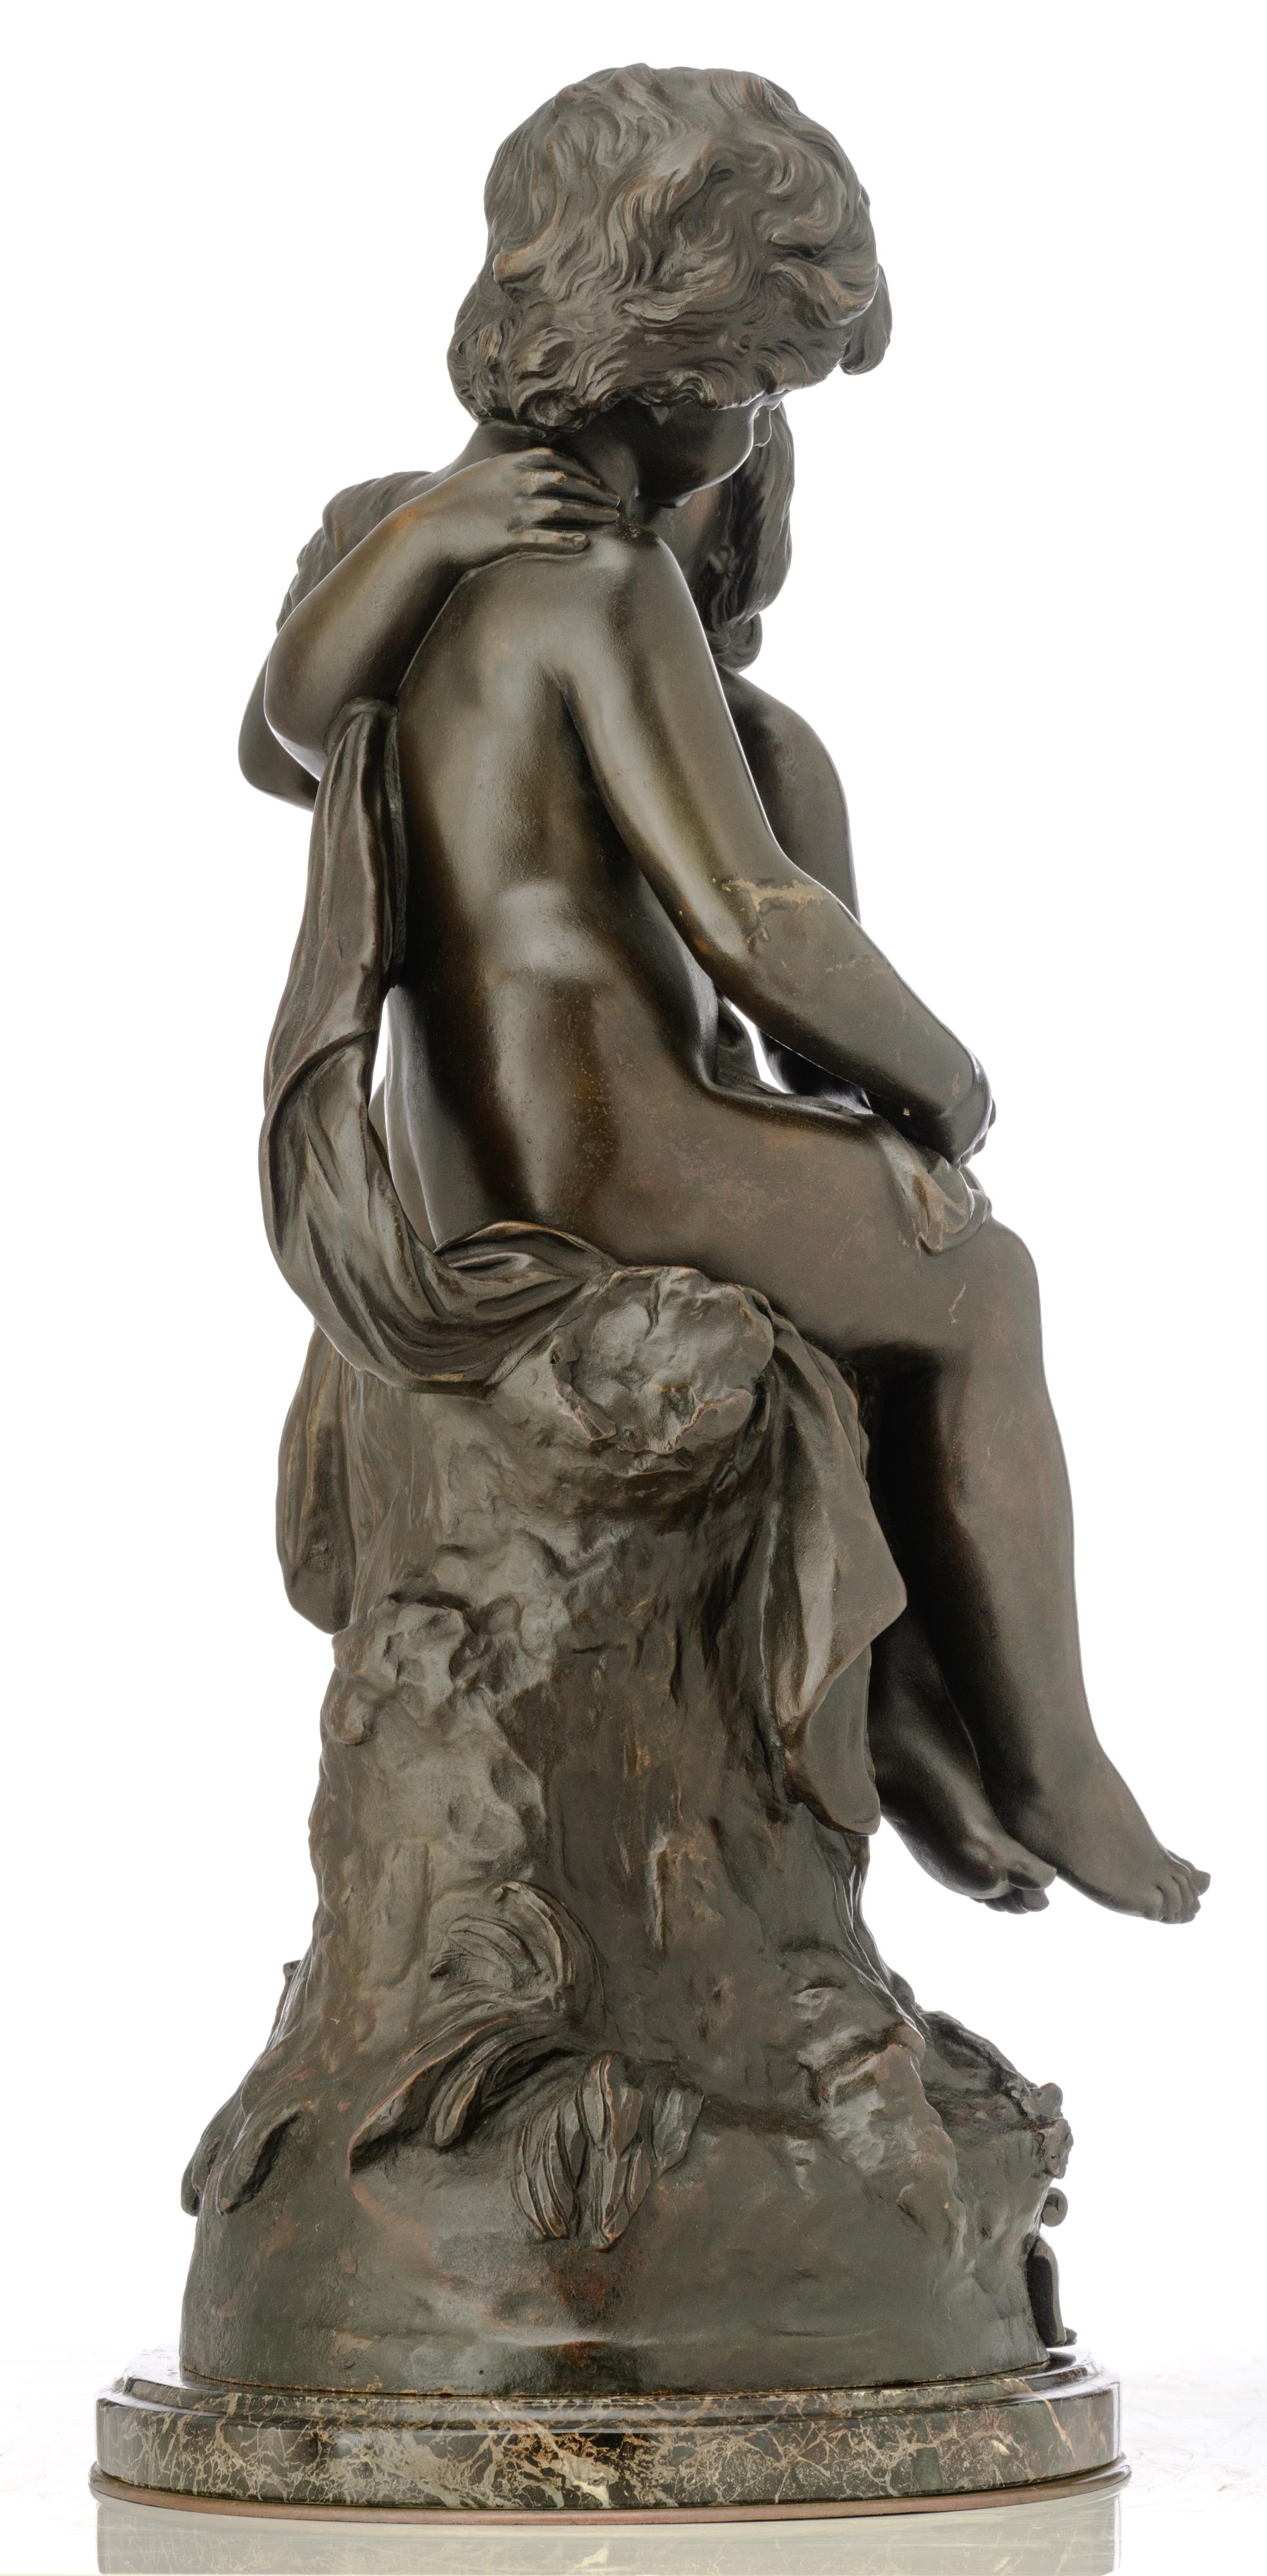 Moreau H., 'Un Secret', patinated bronze on a vert de mer marble base, H 67 - 70,5 (without and with - Image 4 of 9